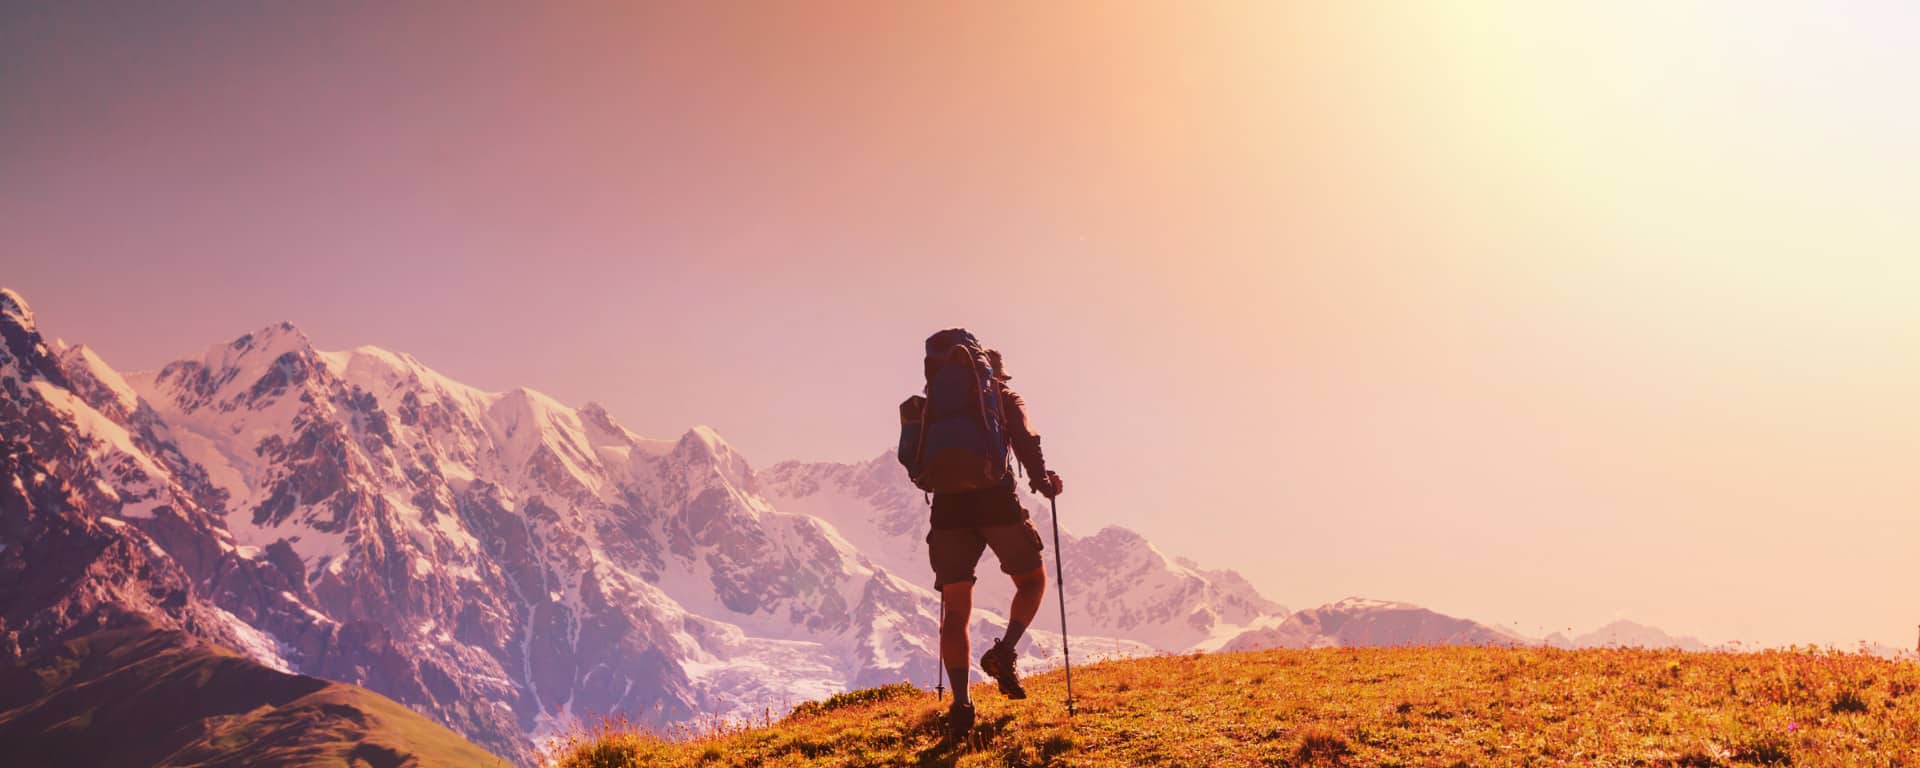 Hiking For Beginners - Feature Image